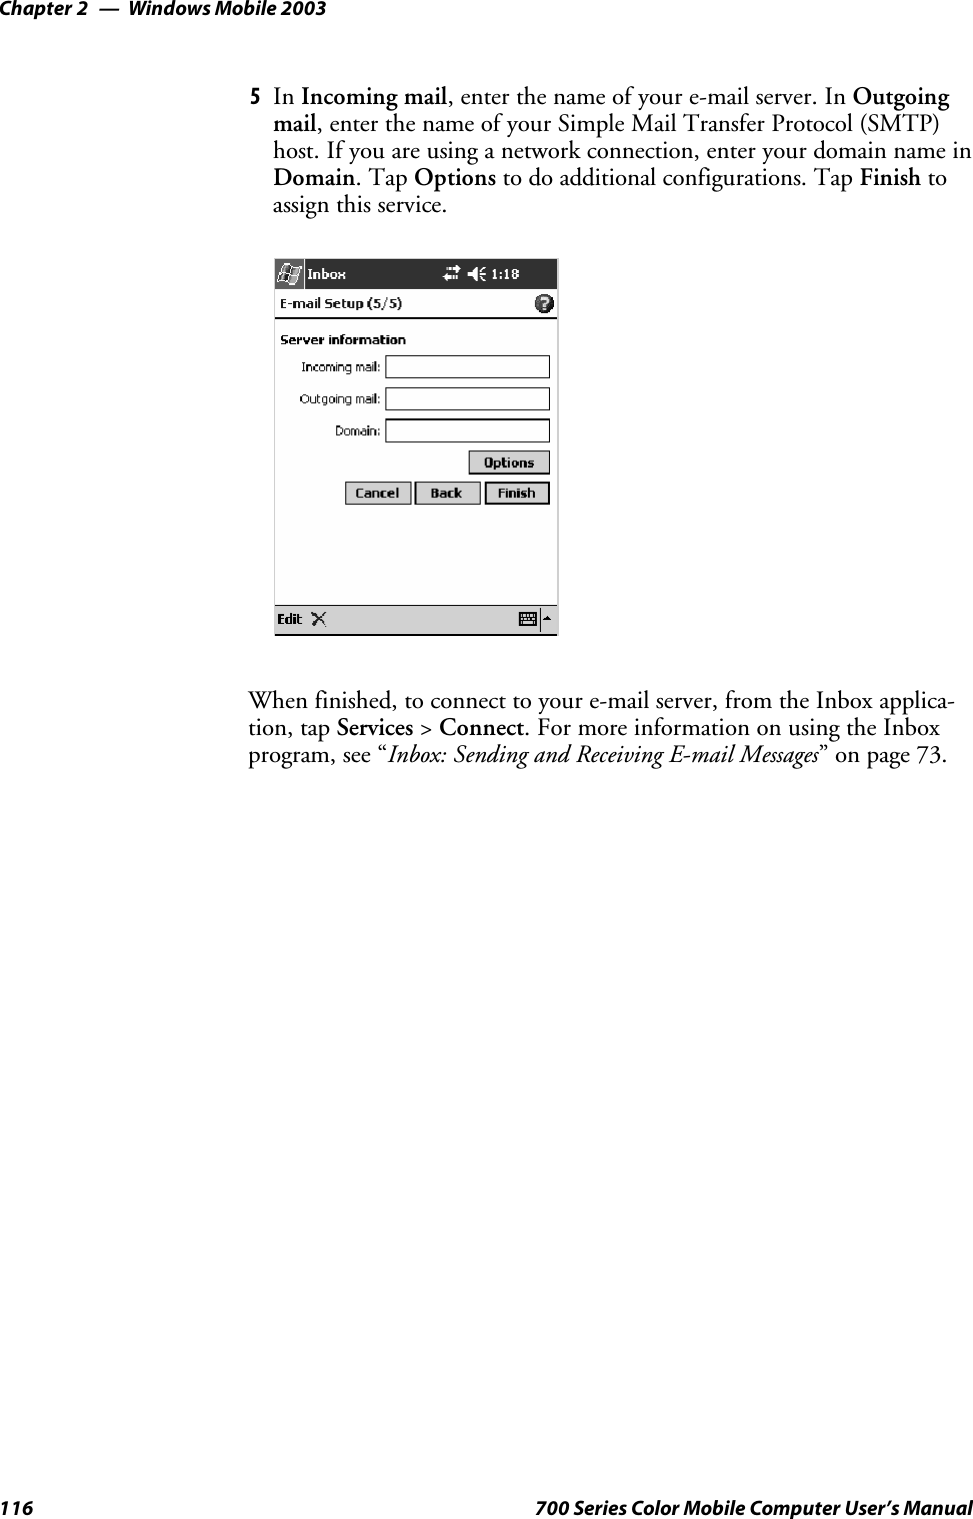 Windows Mobile 2003Chapter —2116 700 Series Color Mobile Computer User’s Manual5In Incoming mail, enter the name of your e-mail server. In Outgoingmail, enter the name of your Simple Mail Transfer Protocol (SMTP)host. If you are using a network connection, enter your domain name inDomain.TapOptions to do additional configurations. Tap Finish toassign this service.When finished, to connect to your e-mail server, from the Inbox applica-tion, tap Services &gt;Connect. For more information on using the Inboxprogram, see “Inbox: Sending and Receiving E-mail Messages” on page 73.